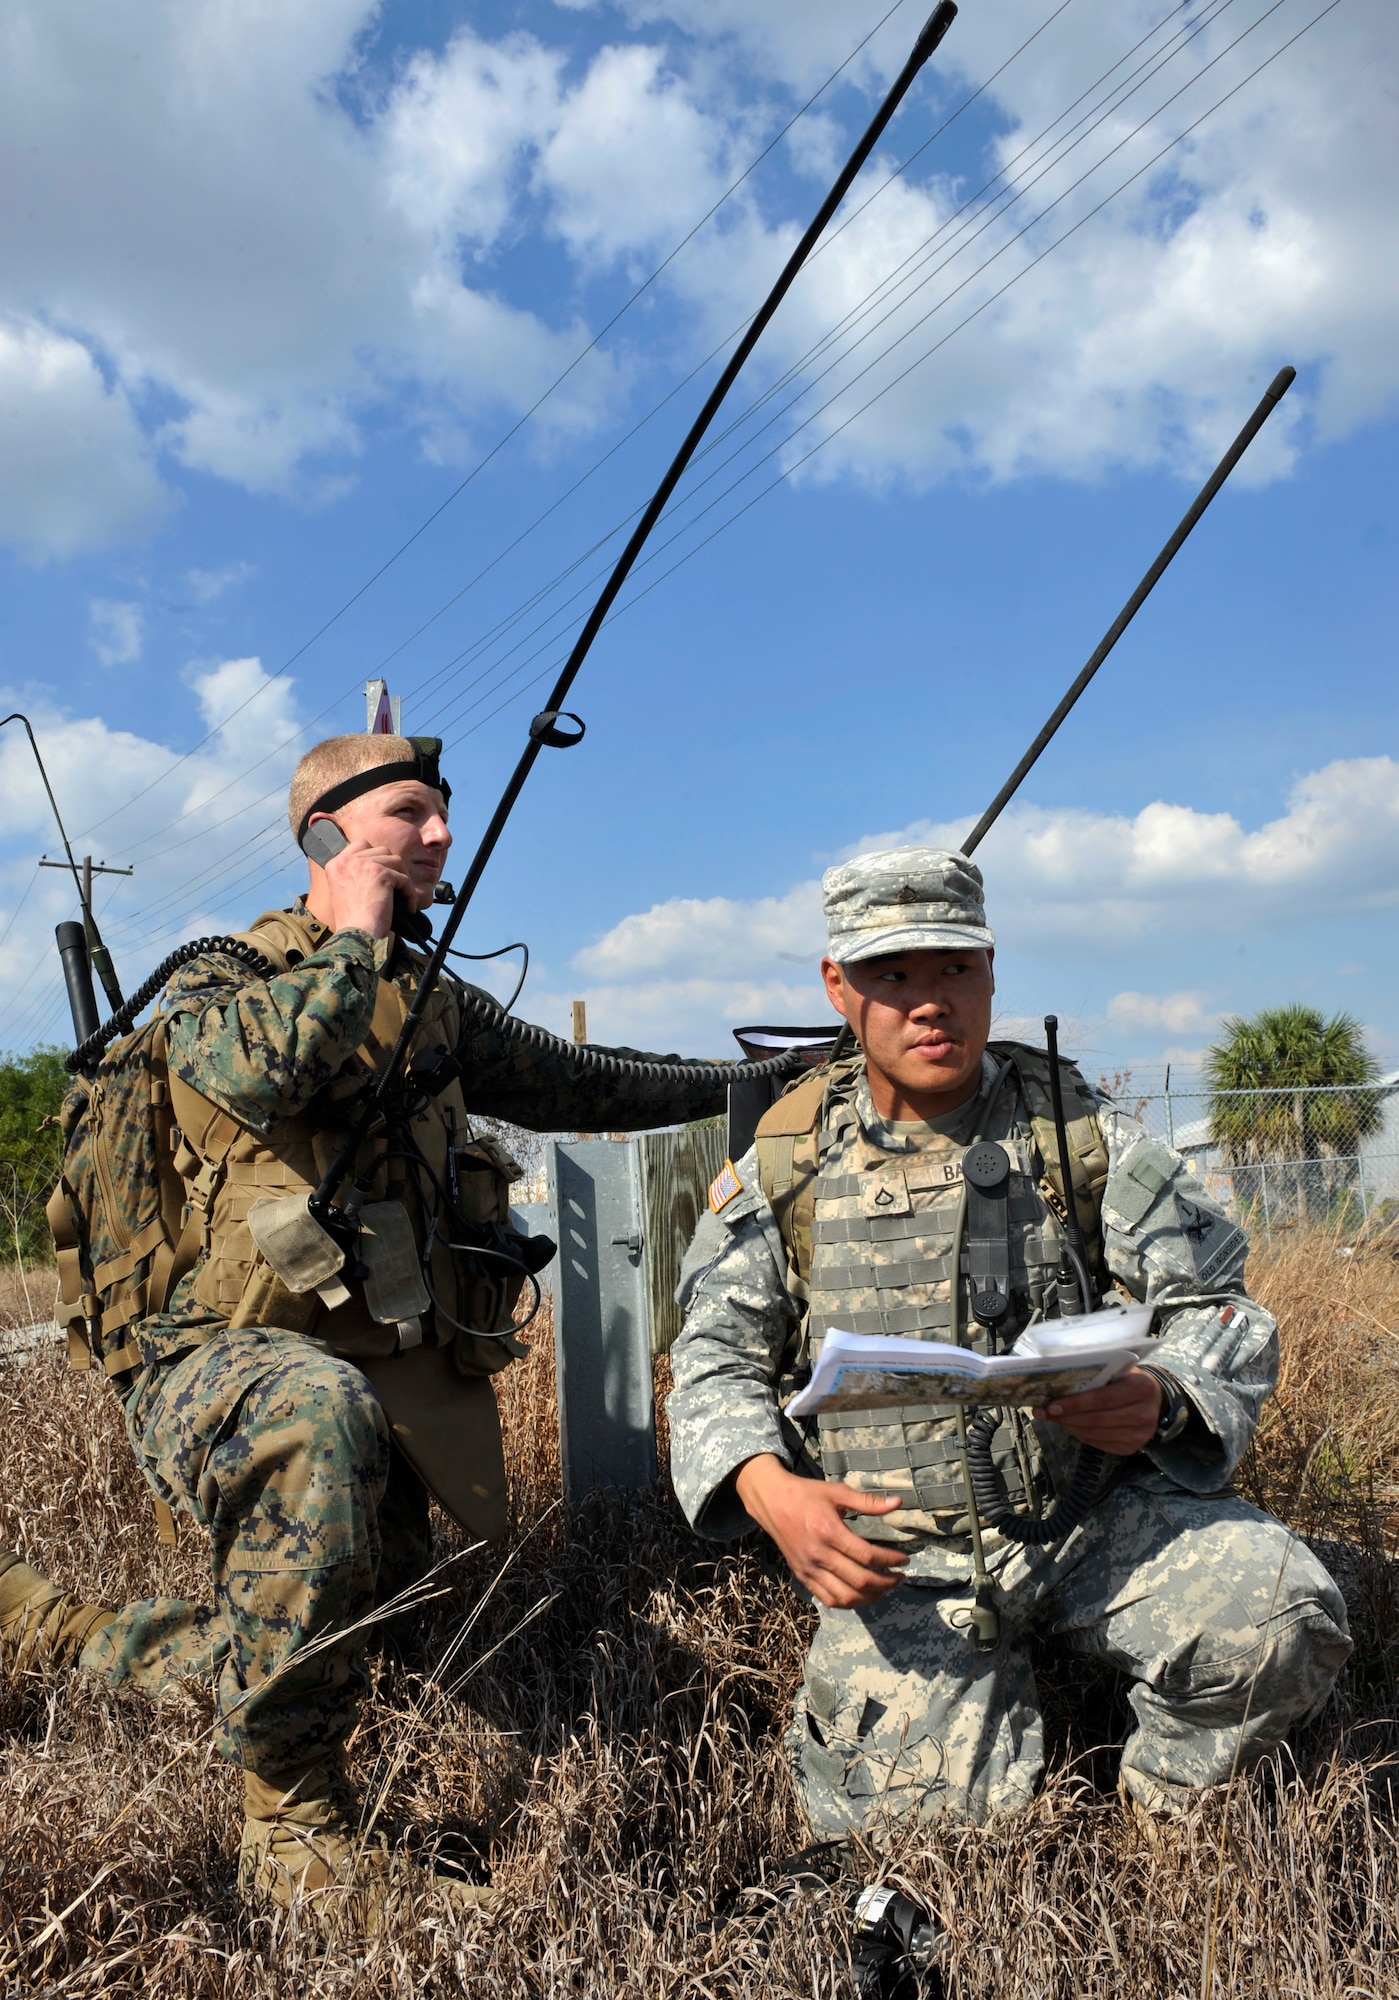 AVON PARK, Fla.—Marine Corps Lance Cpl. James Swaffield, 1st Battalion 11th Marines and Army Pfc. Jayson Back, 2nd Battalion 5th Infantry Regiment joint fires observers, radio to the aircraft and the joint terminal attack controller on what they see at their location during joint exercise ATLANTIC STRIKE 11-01 Feb. 16. The two members took turns radioing describing what they saw at their location and all the information needed to drop bombs on target. (U.S. Air Force photo/Airman 1st Class Nicholas Benroth)(RELEASED)